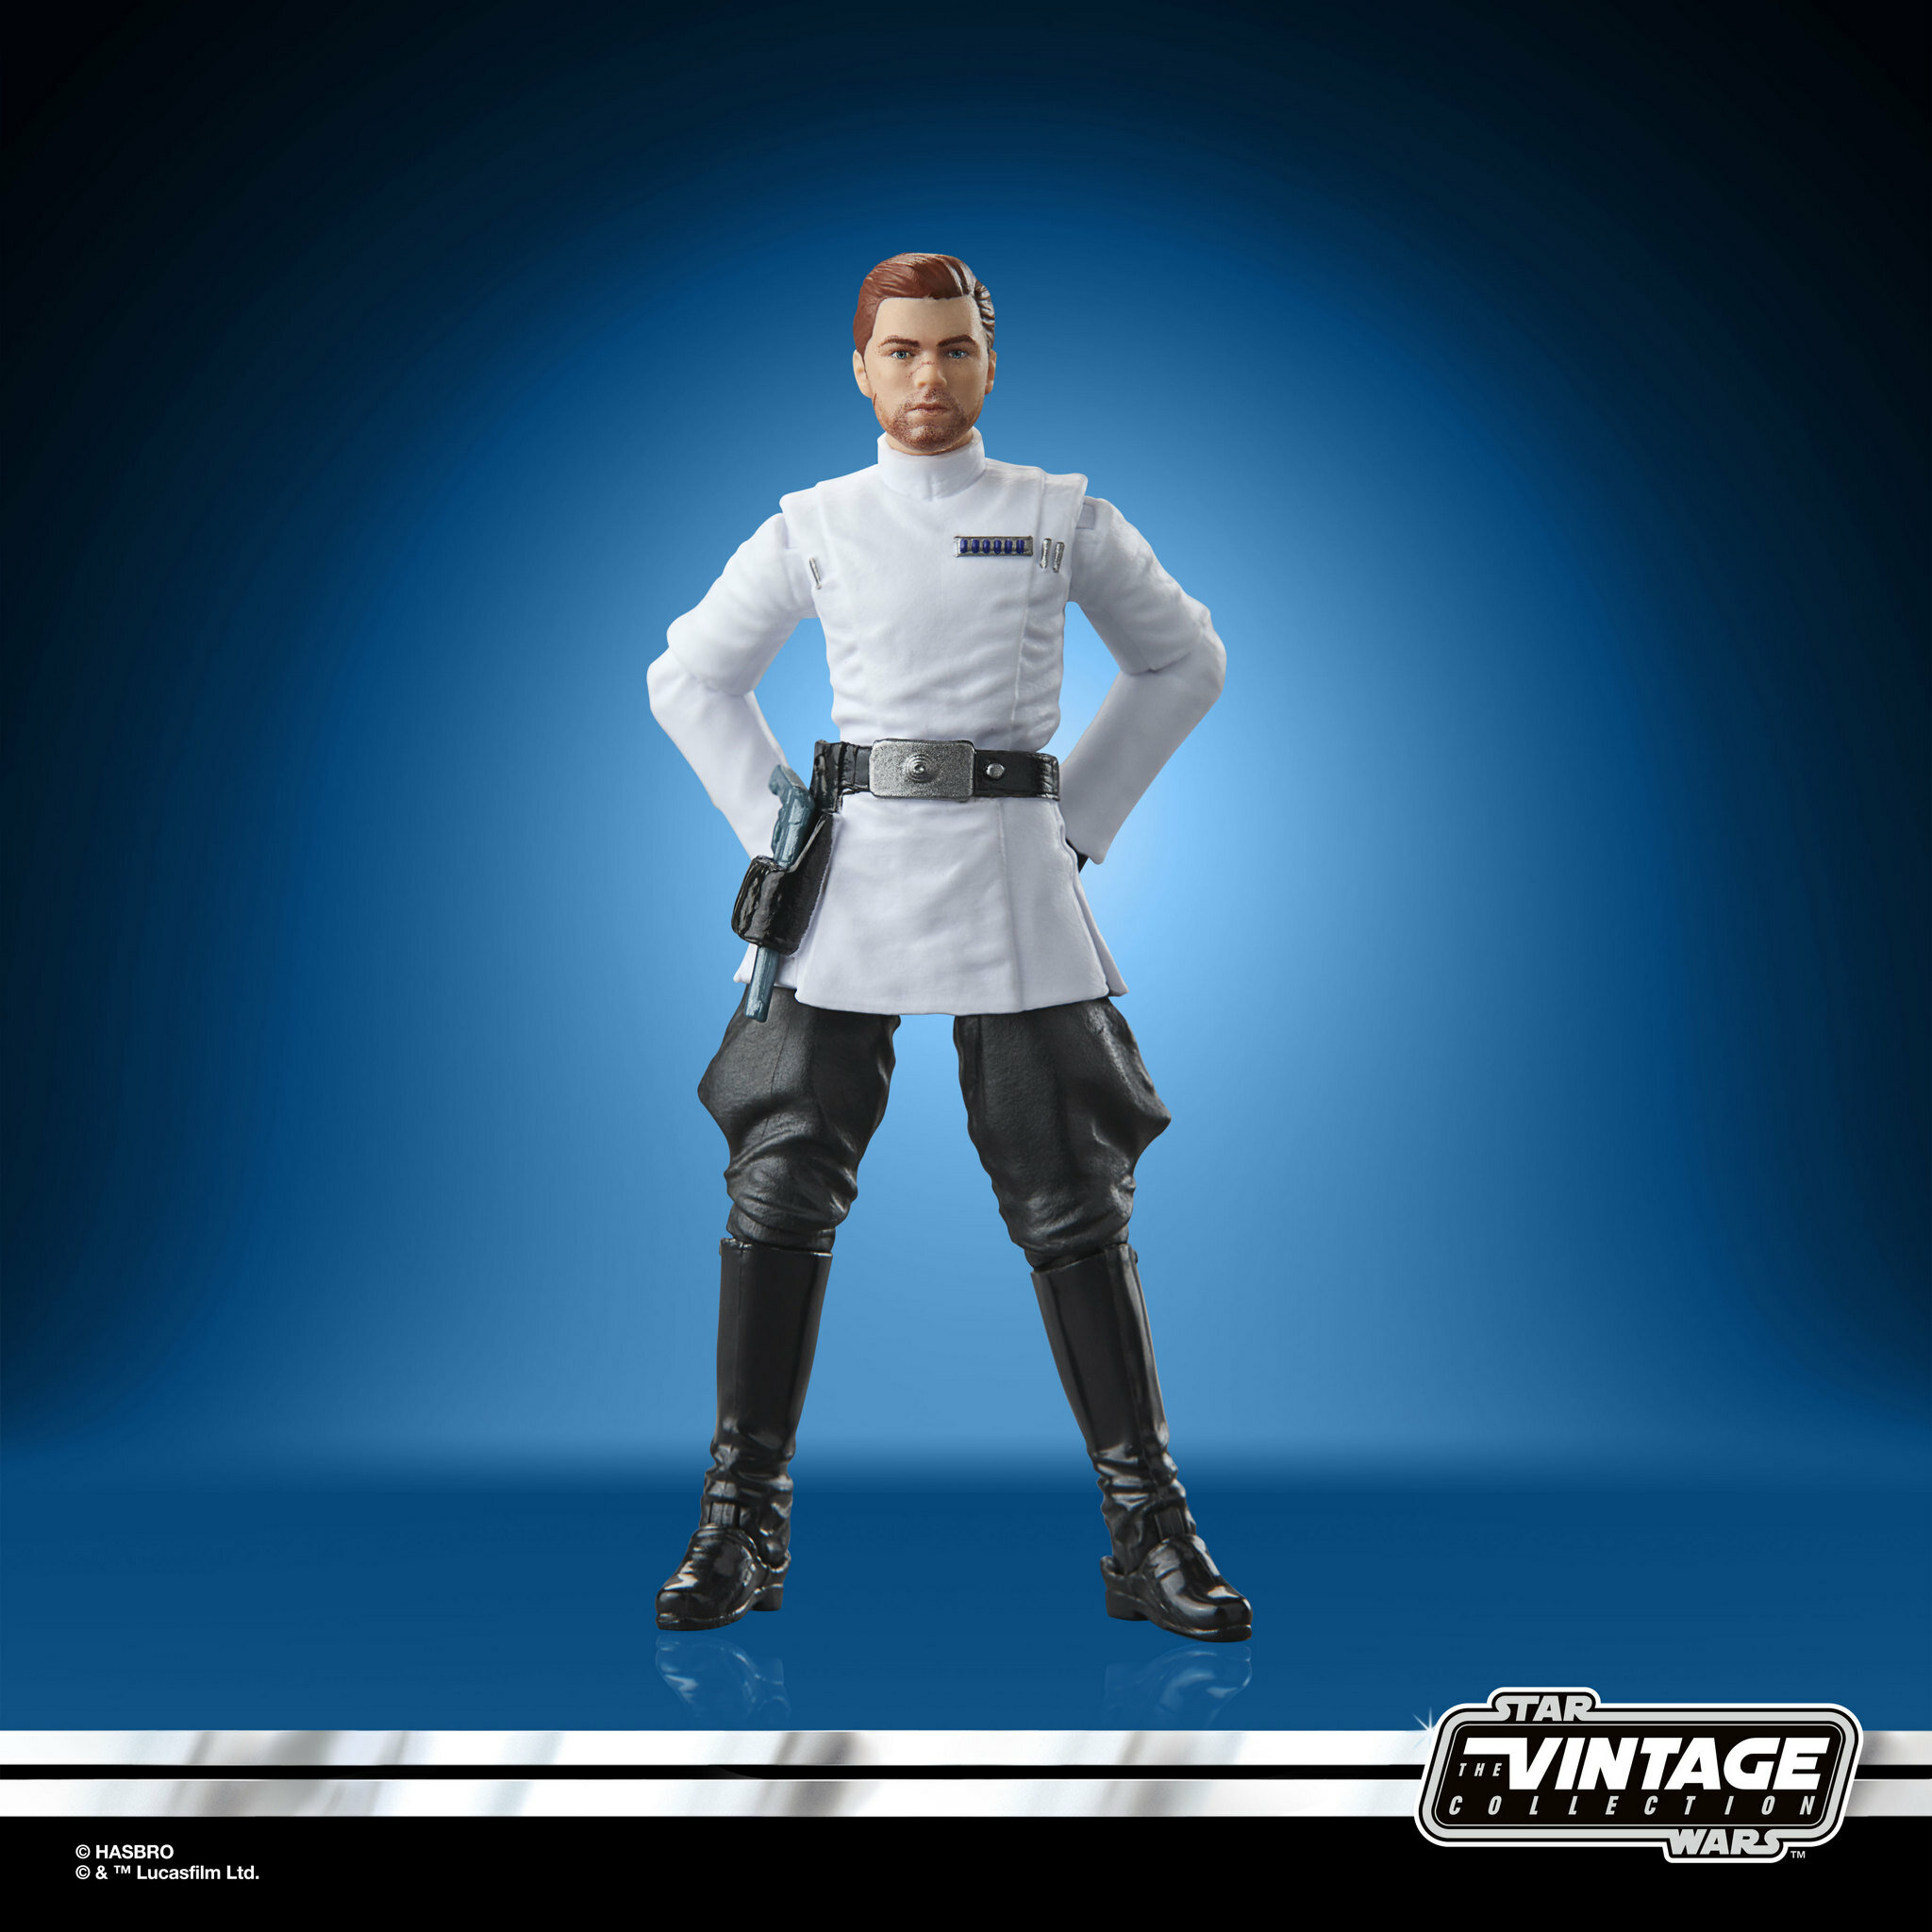 STAR-WARSTHE-VINTAGE-COLLECTION-CAL-KESTIS-IMPERIAL-OFFICER-DISGUISE-11.jpg.030f41eb89c2fb674c7733f3c7922d74.jpg